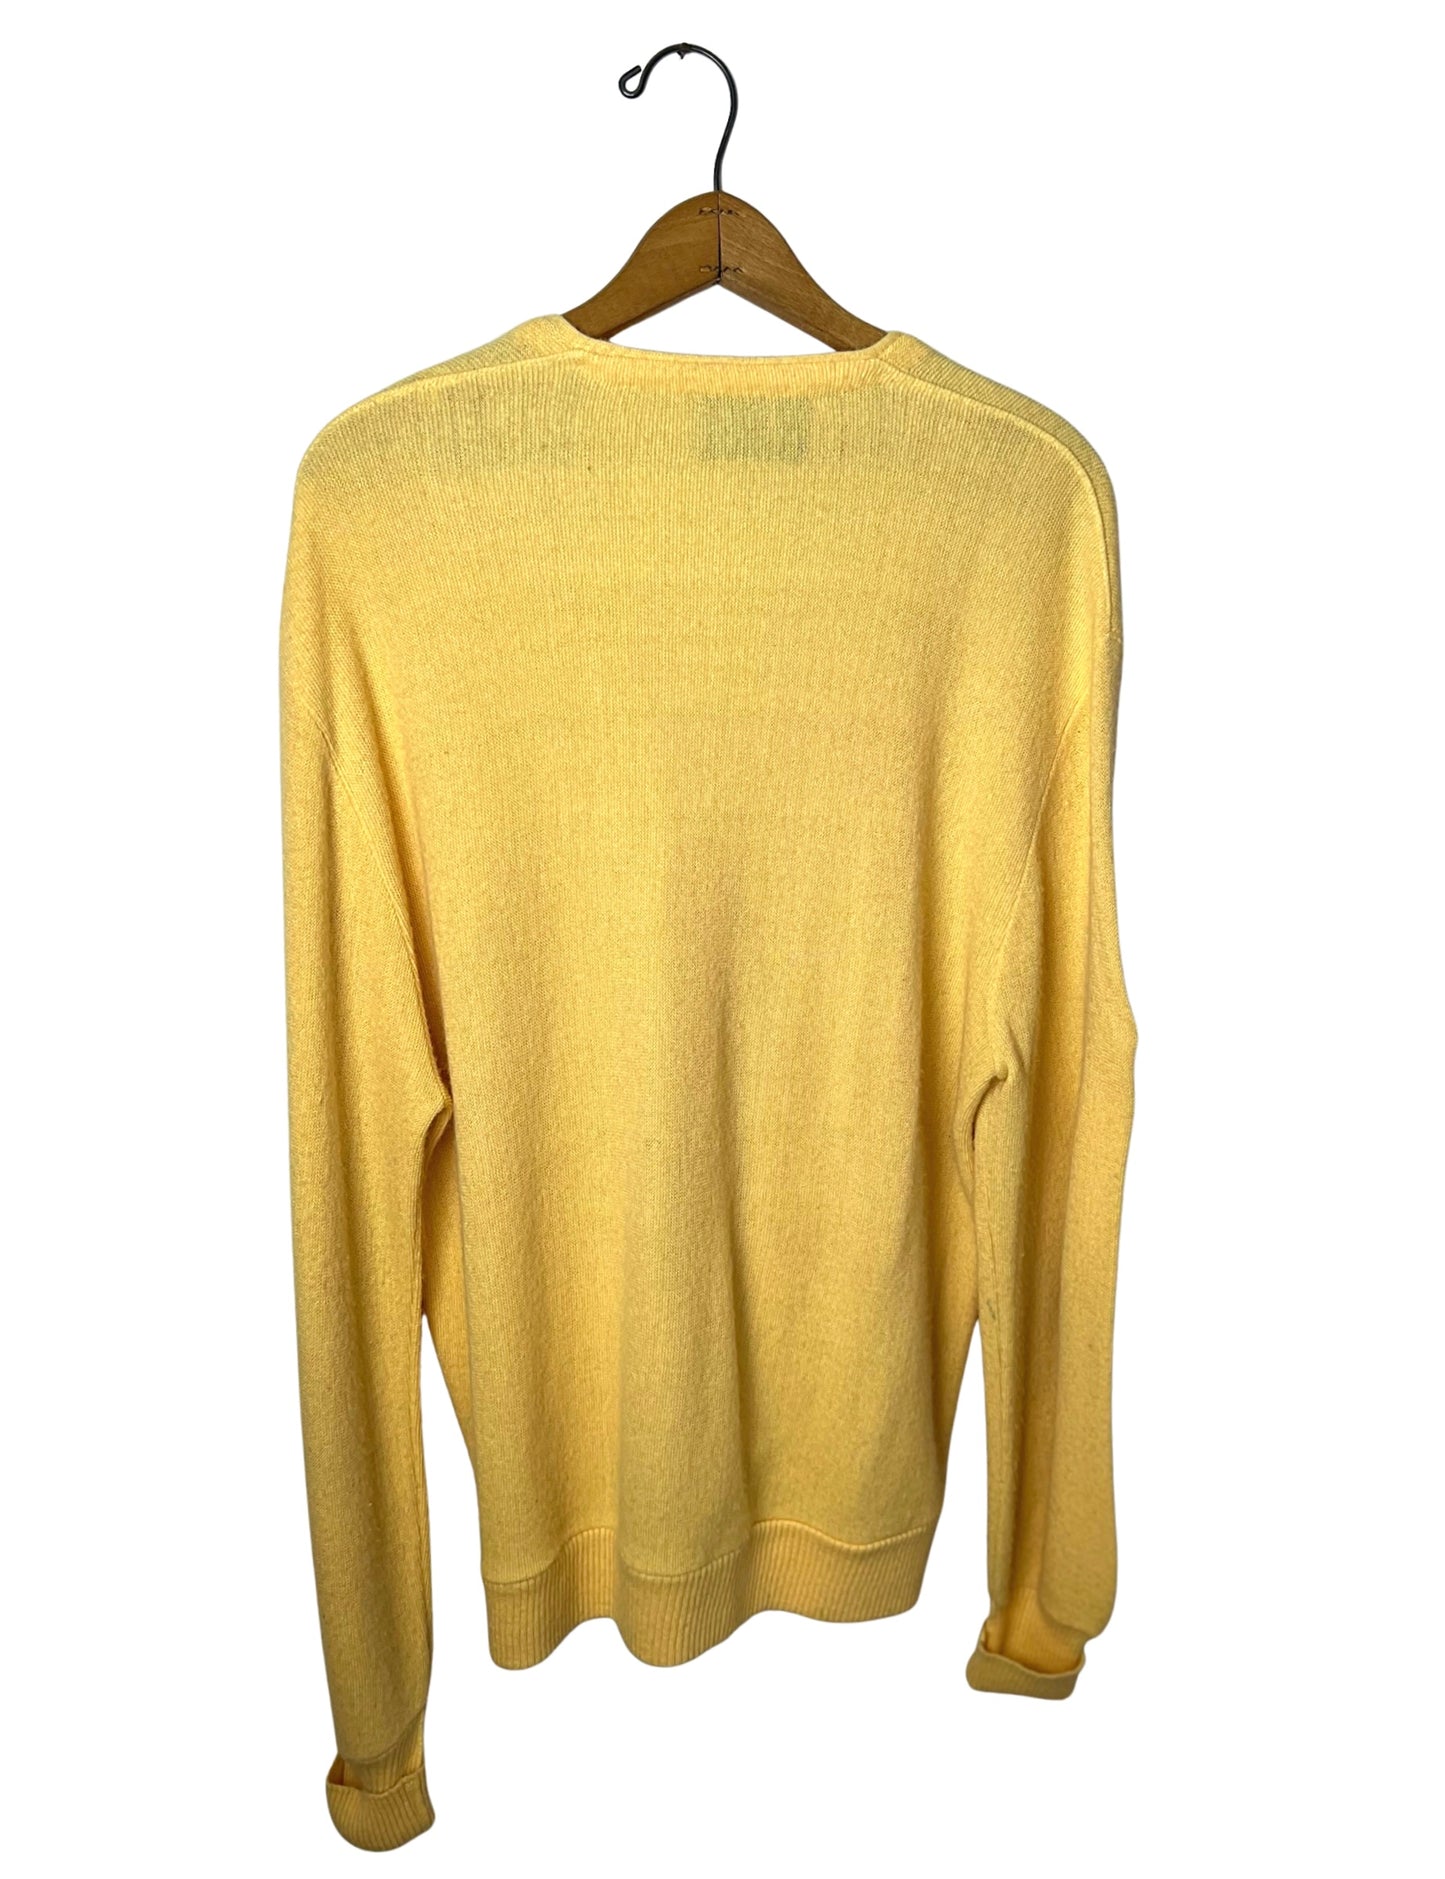 80’s Butter Yellow Arnold Palmer Basic V-Neck Cardigan Sweater